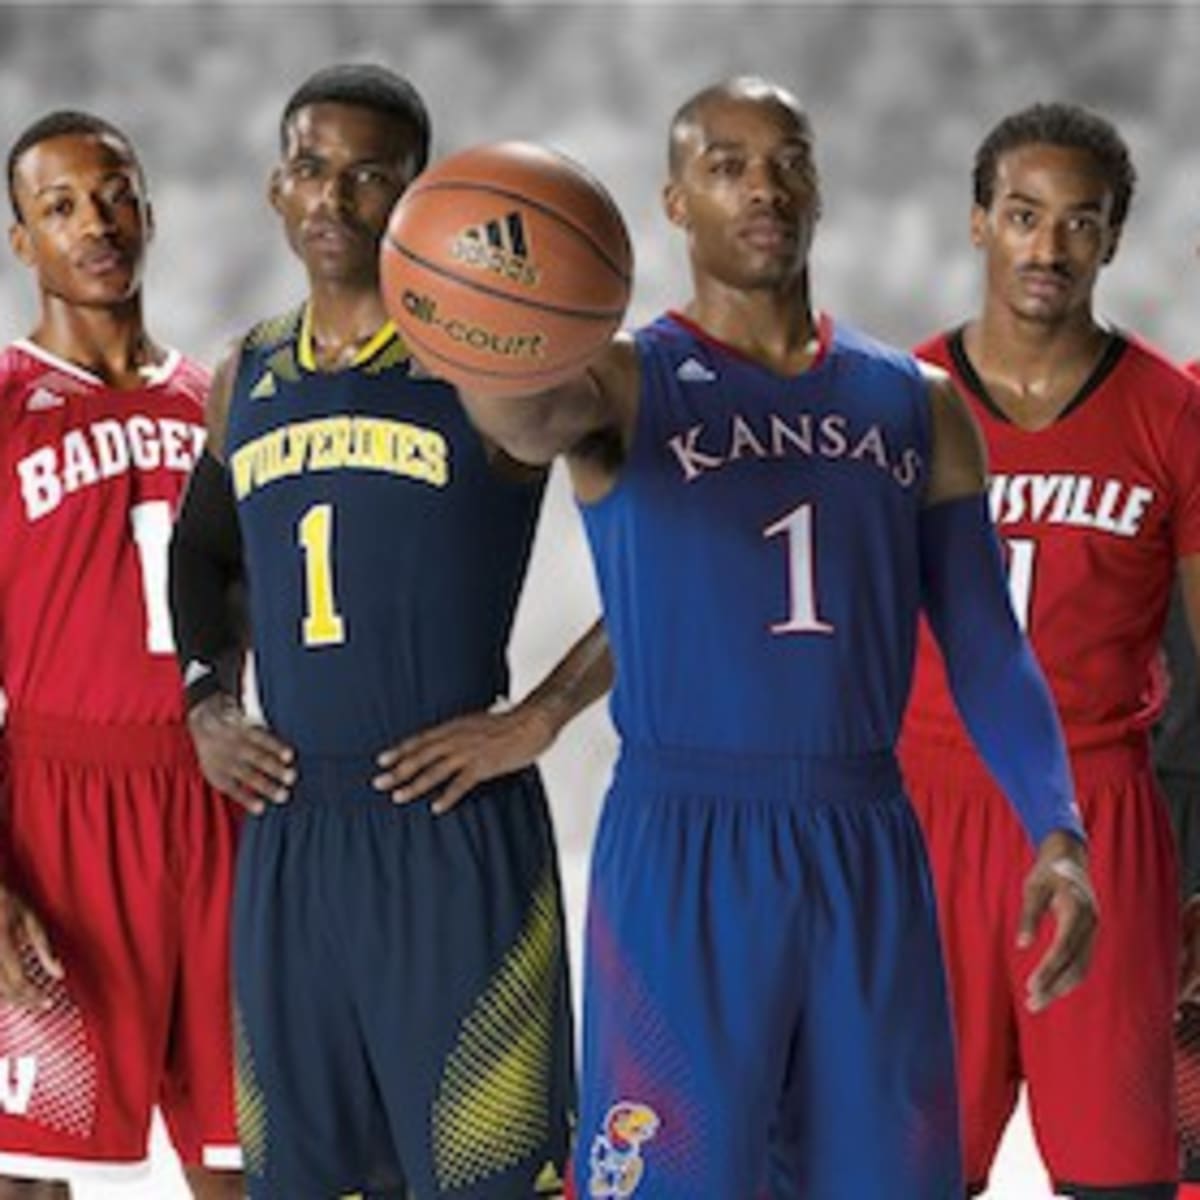 adidas Unveils 2014 Made In March NCAA Basketball Uniforms